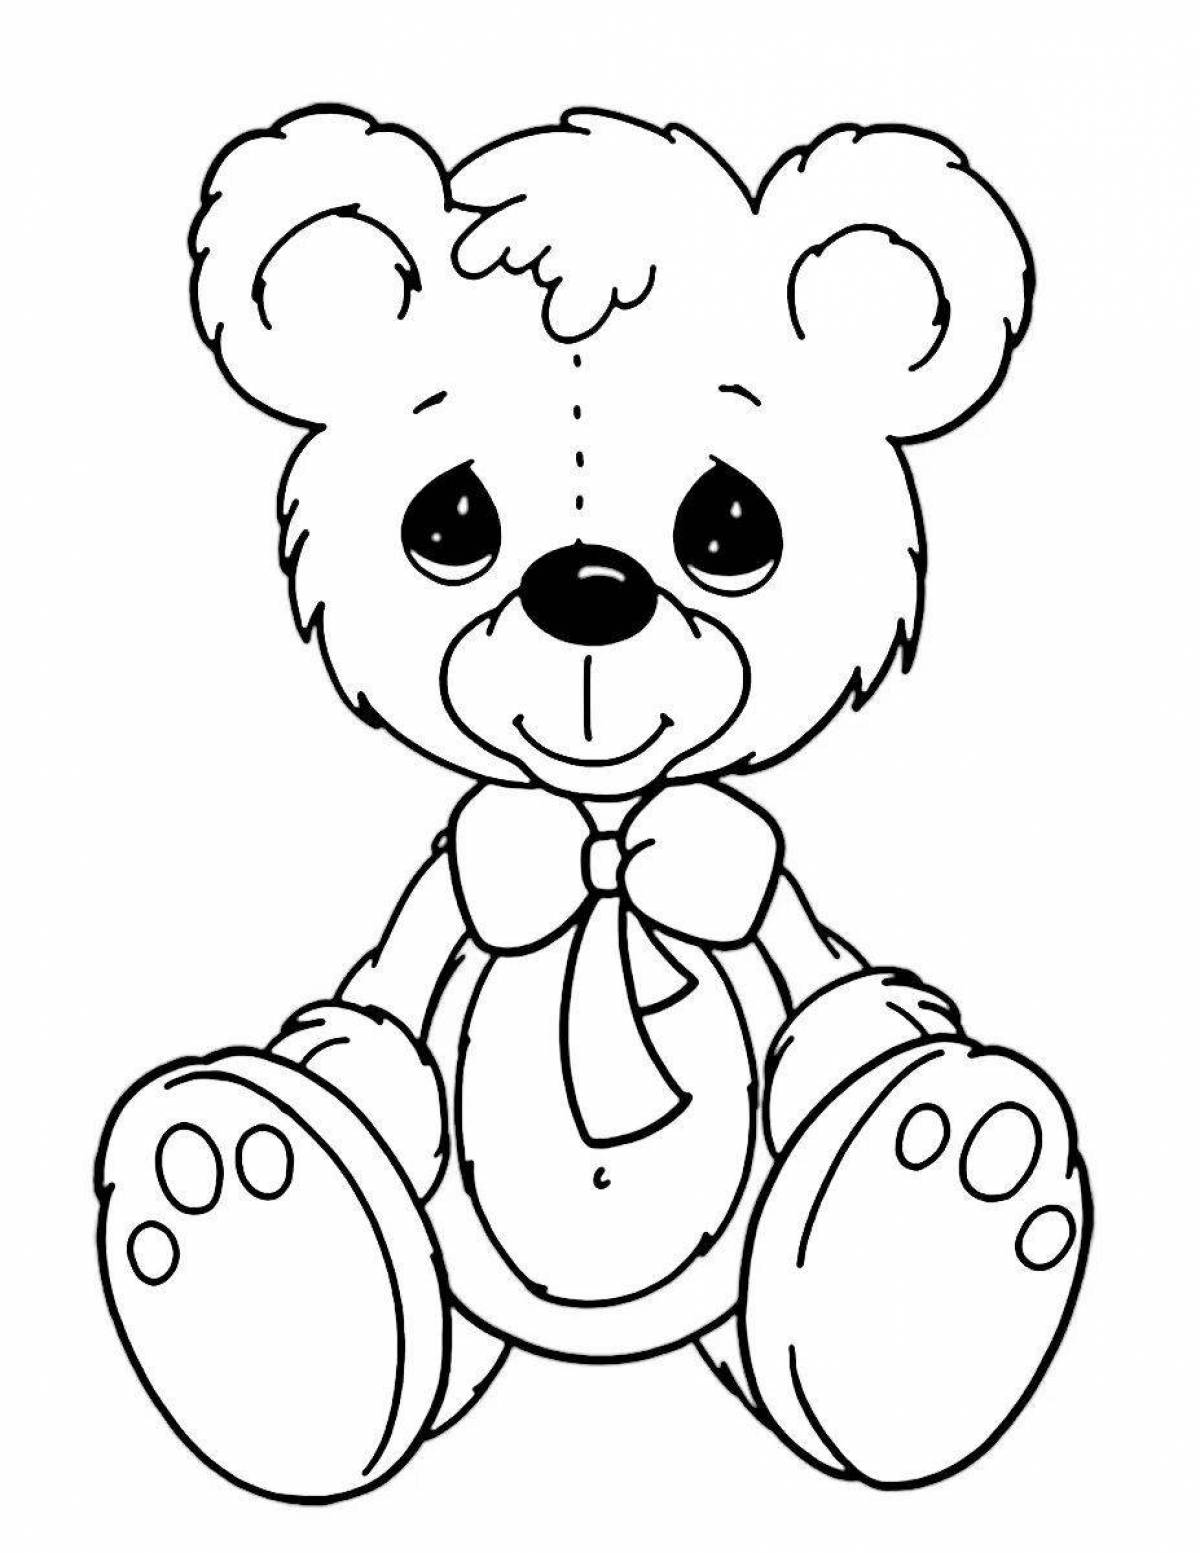 Coloring book fluffy teddy bear for girls